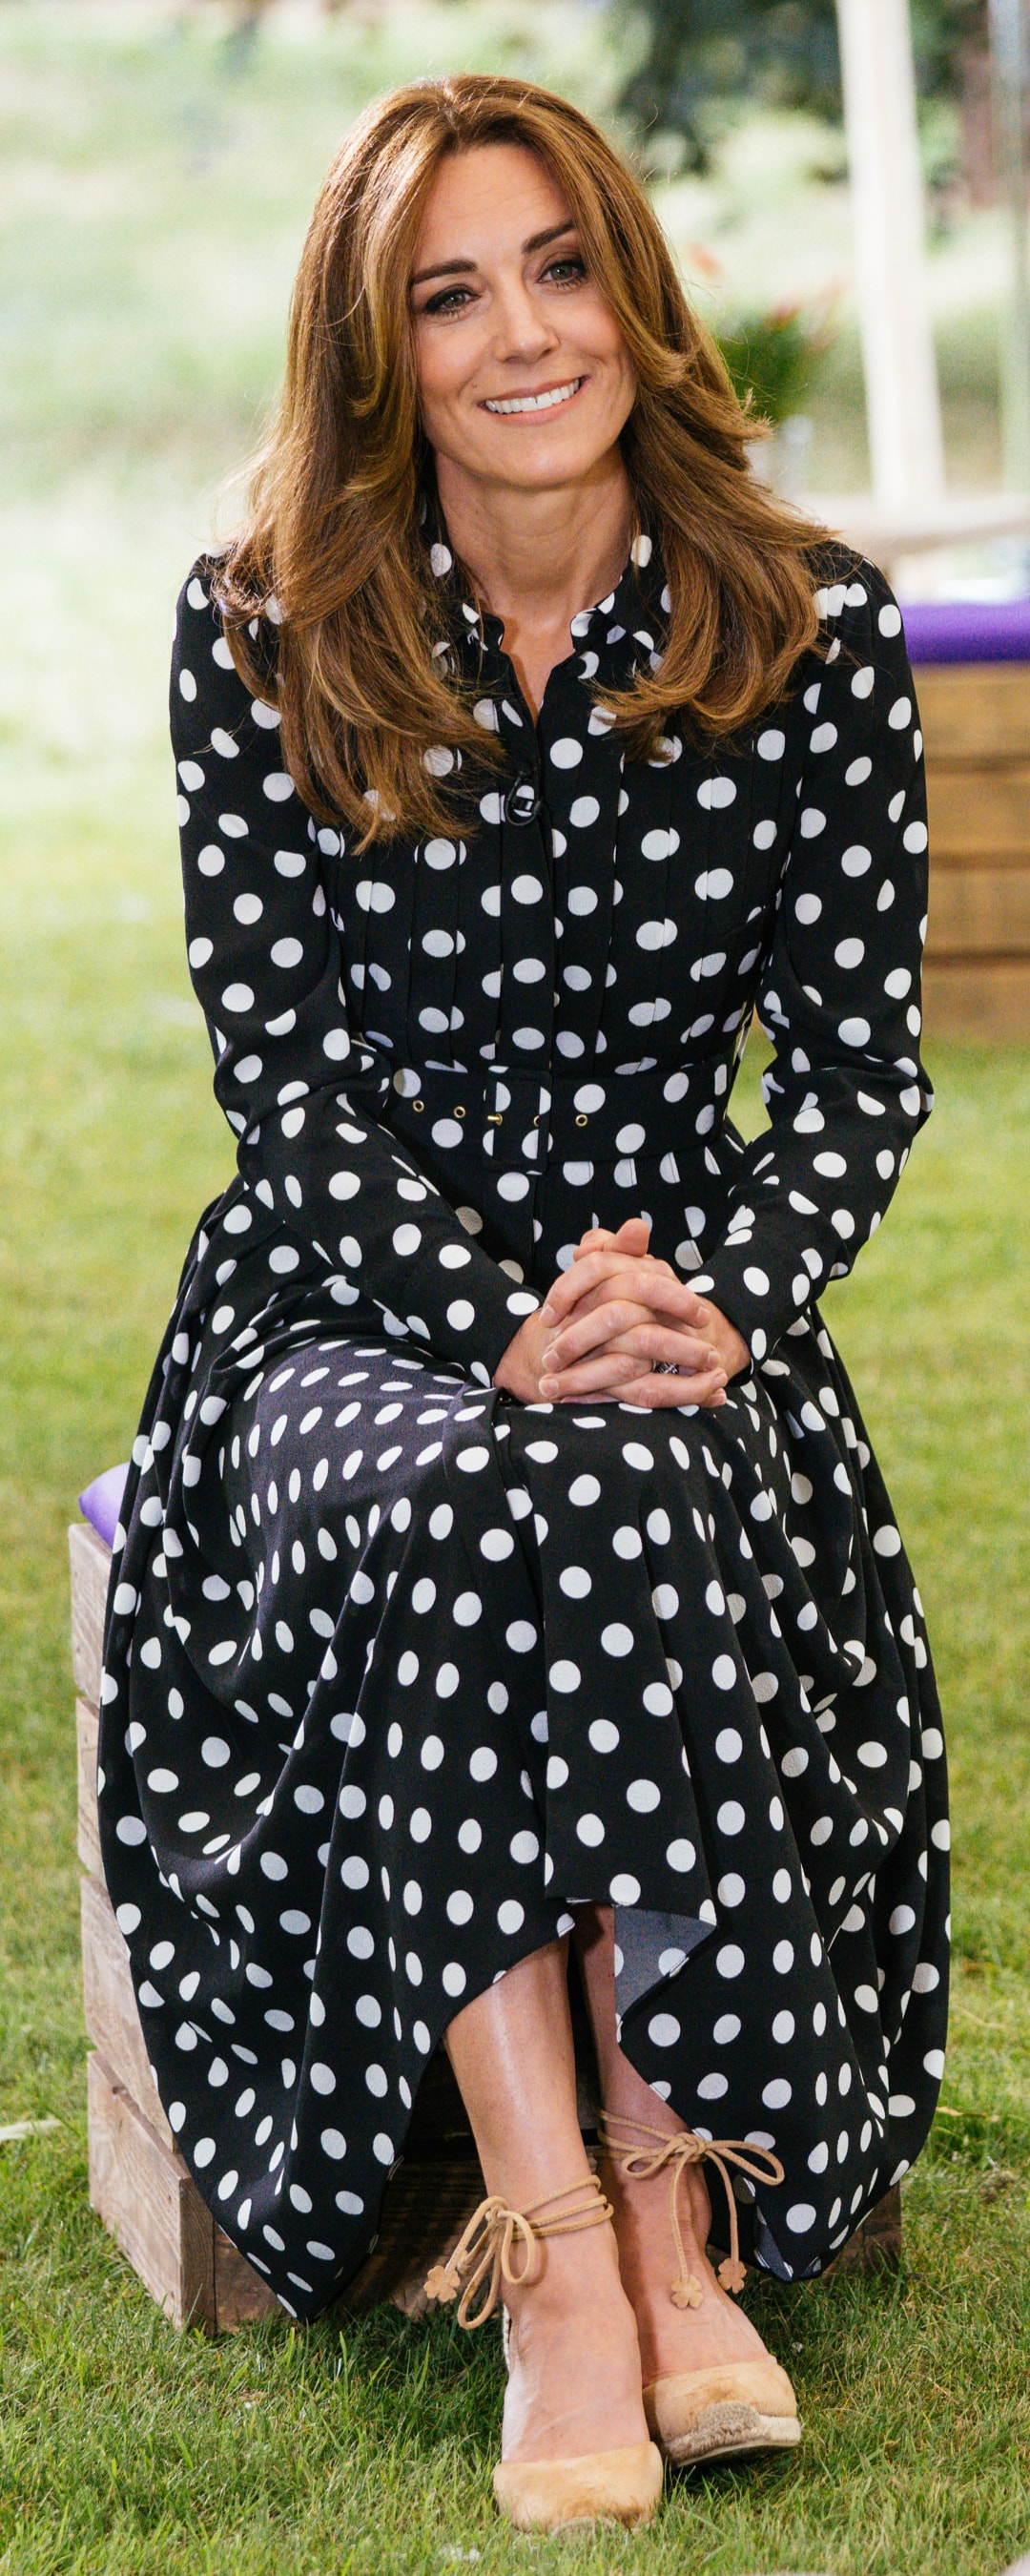 The Duchess of Cambridge helps launch 'Tiny Happy People' in July 2020